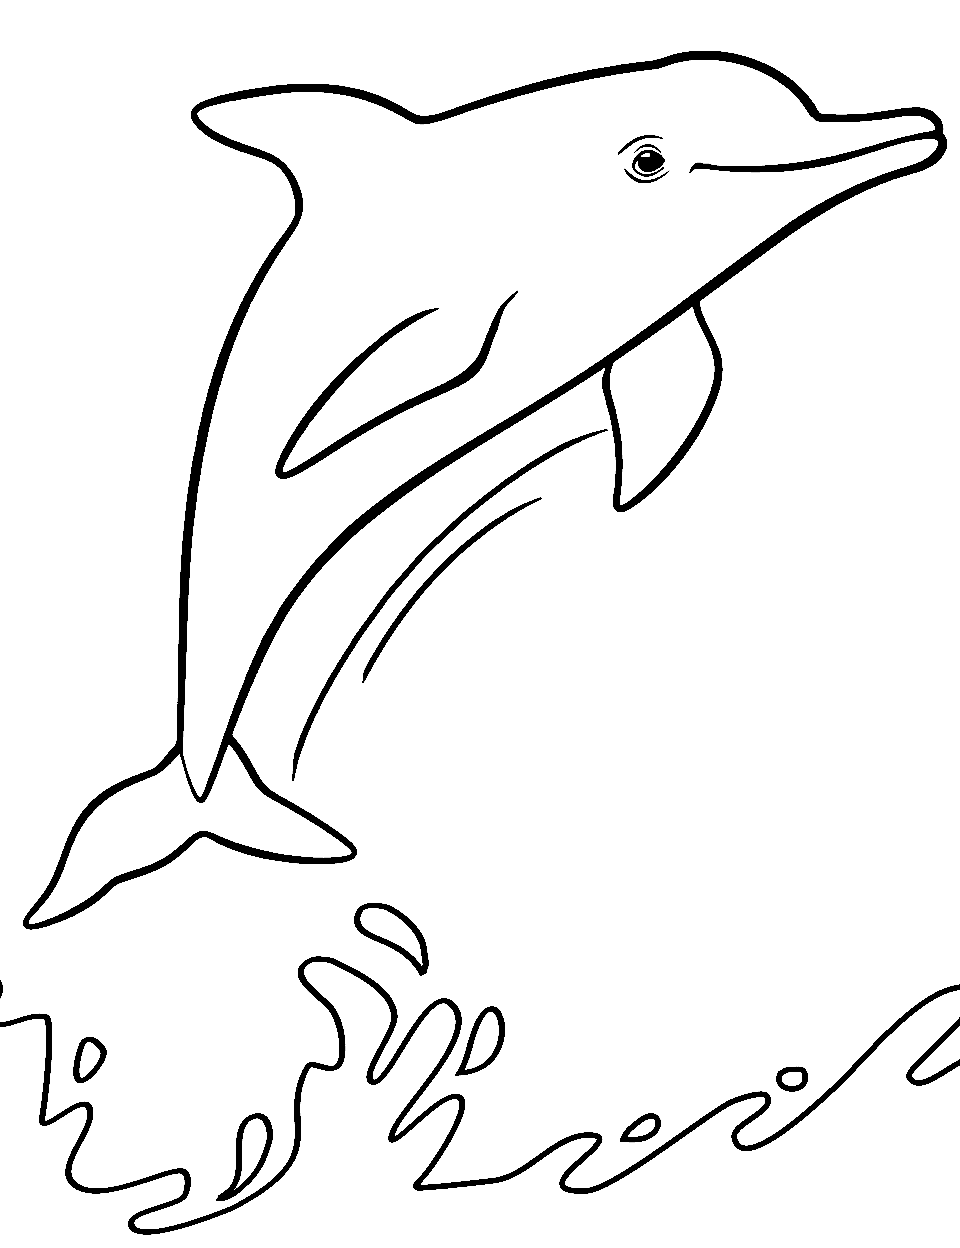 Dolphin Leaping over Sea Coloring Page - A daring dolphin energetically leaping over the sea.